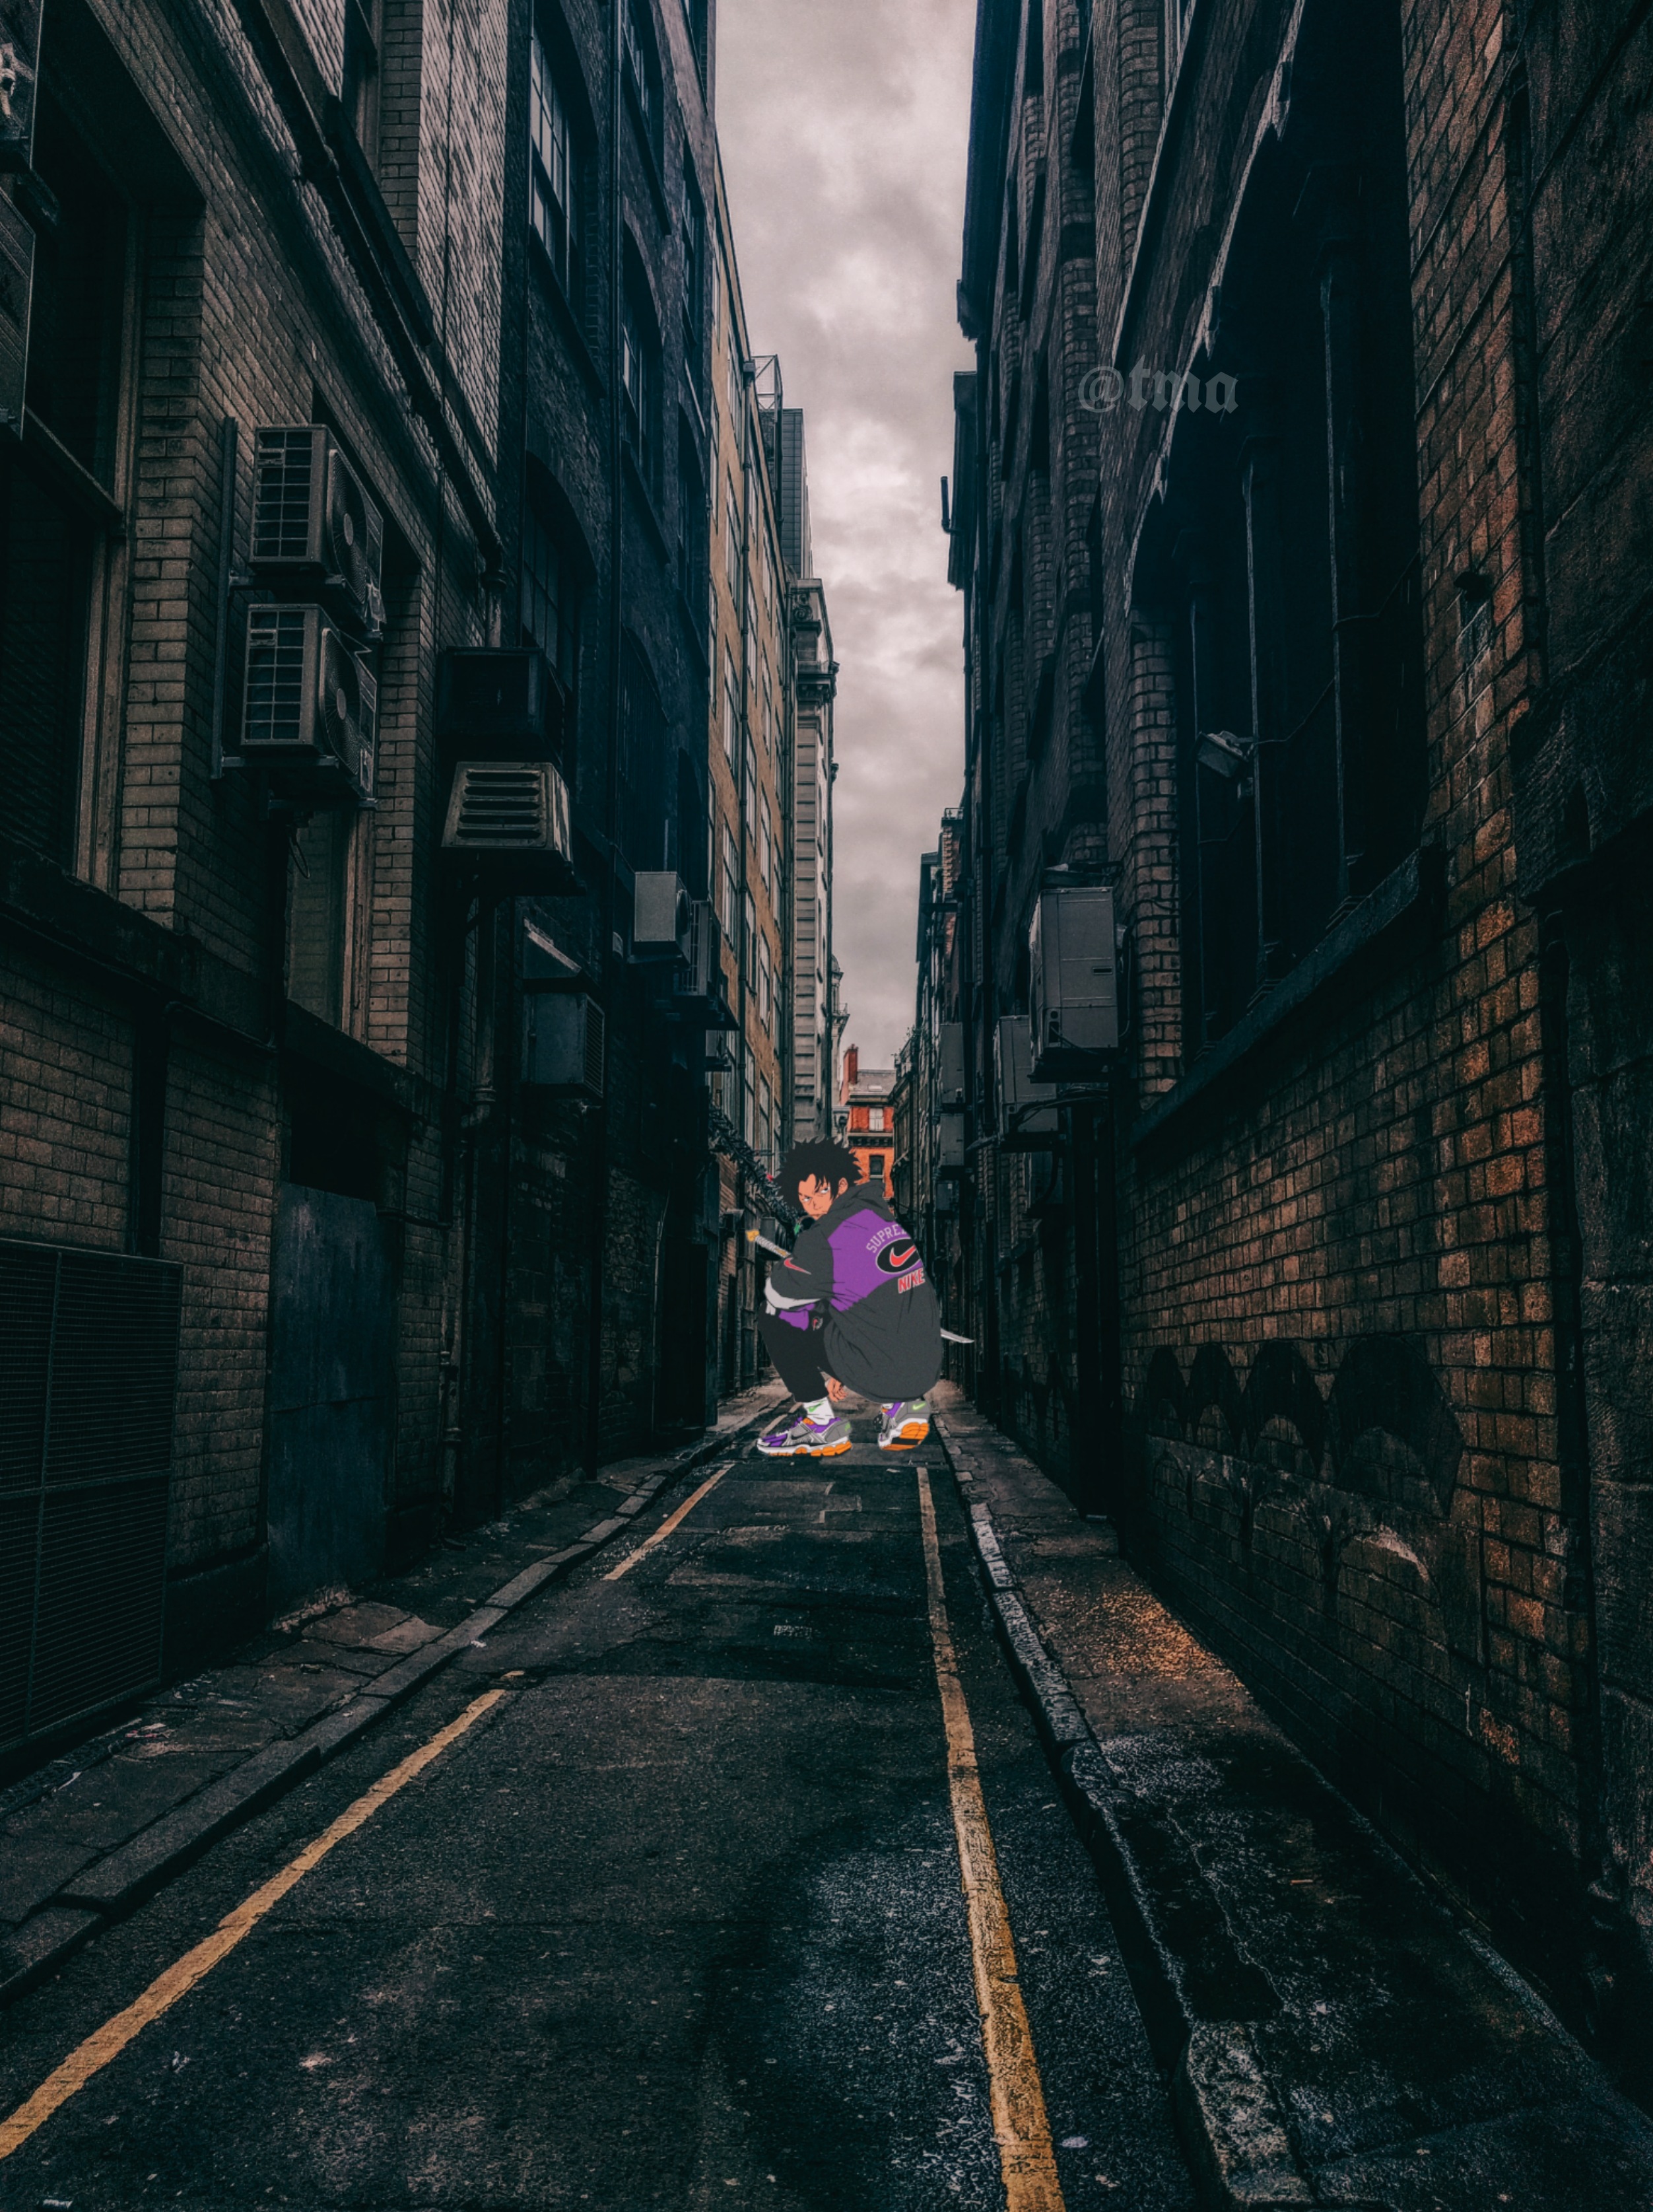 Anime Alleyway By The Masked Artist